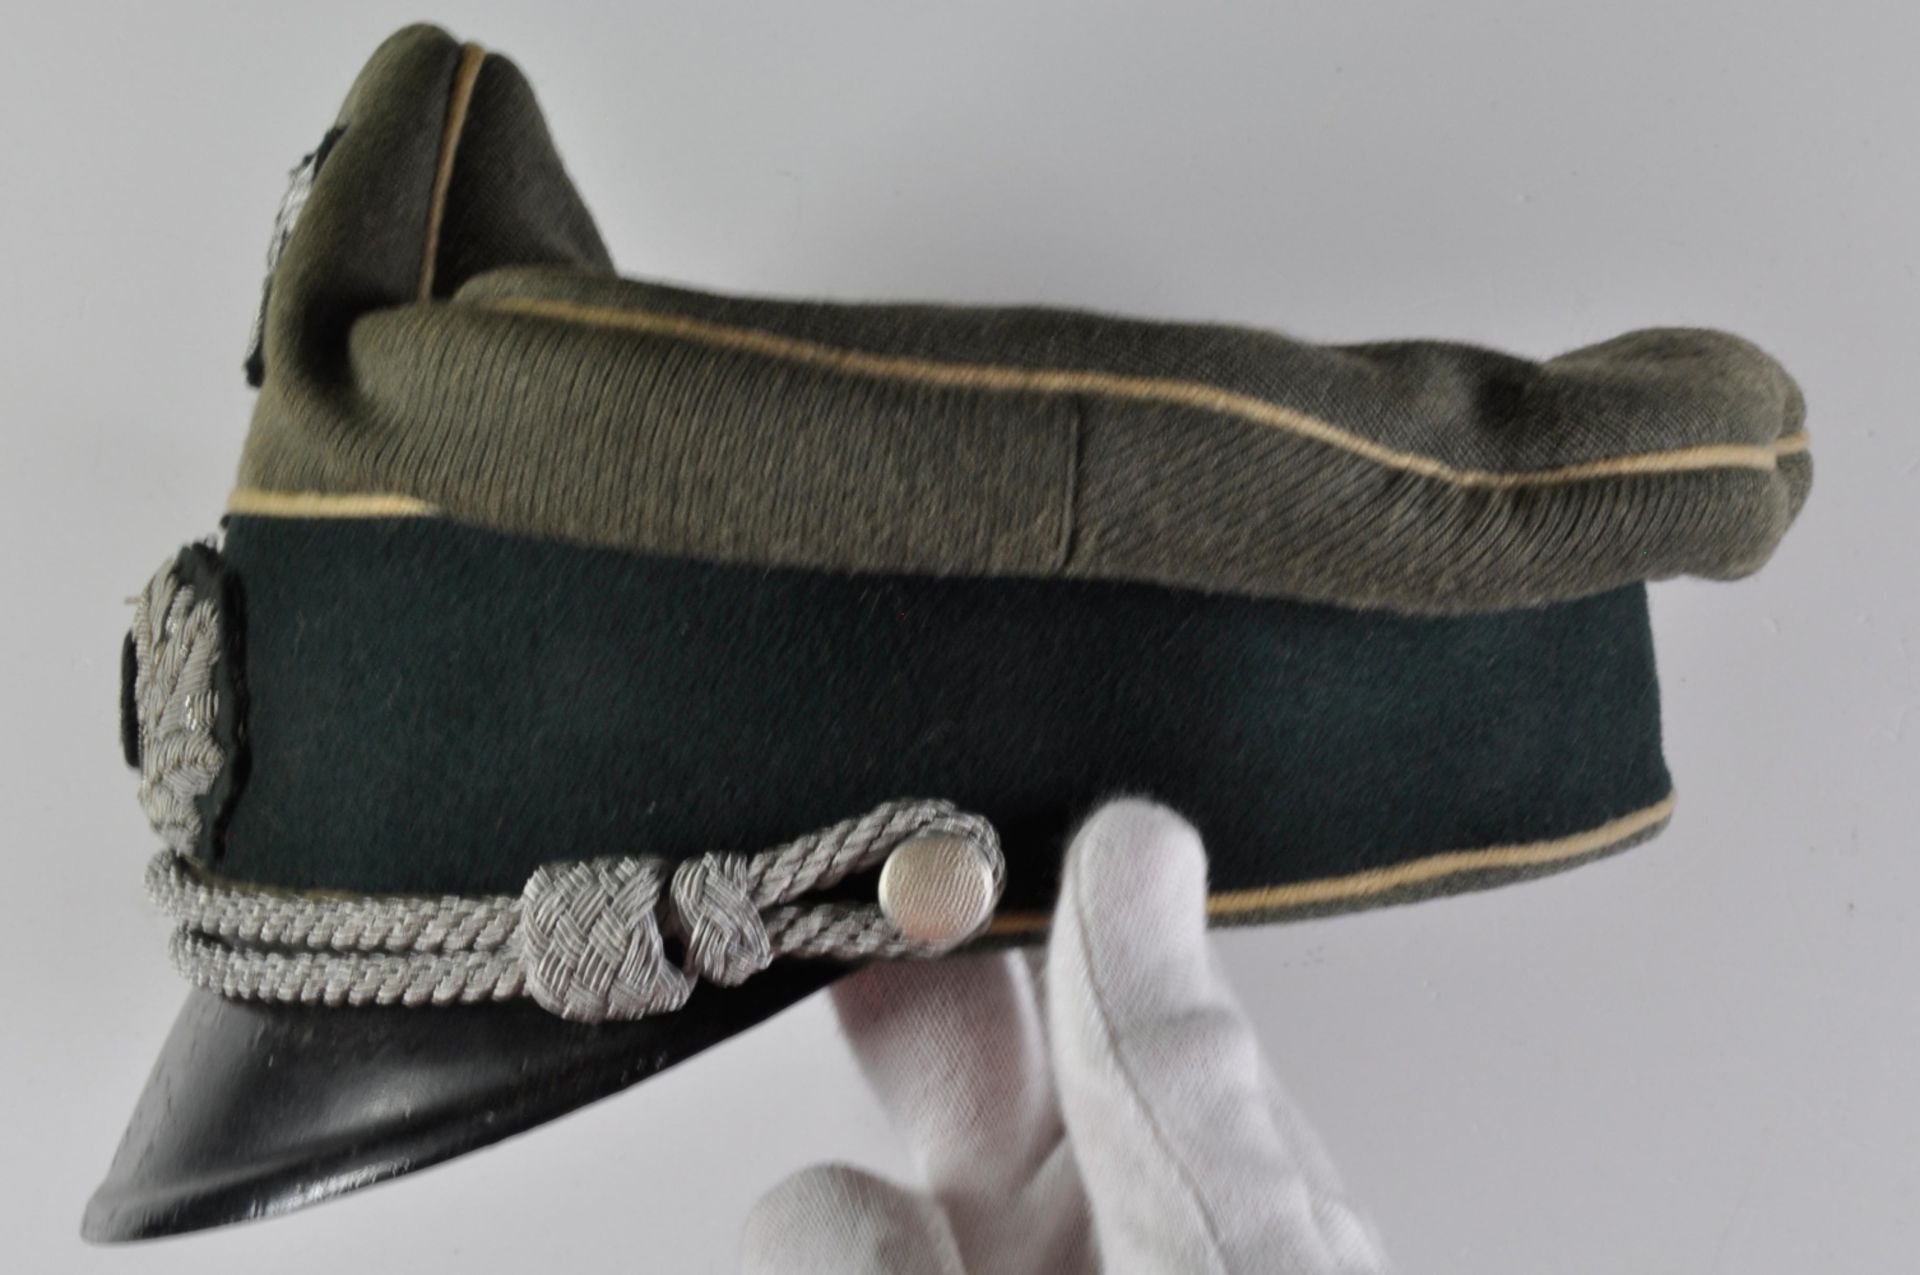 German Armed Forces Army, peaked cap for officers the infantry, field gray fine cloth complete - Image 2 of 4